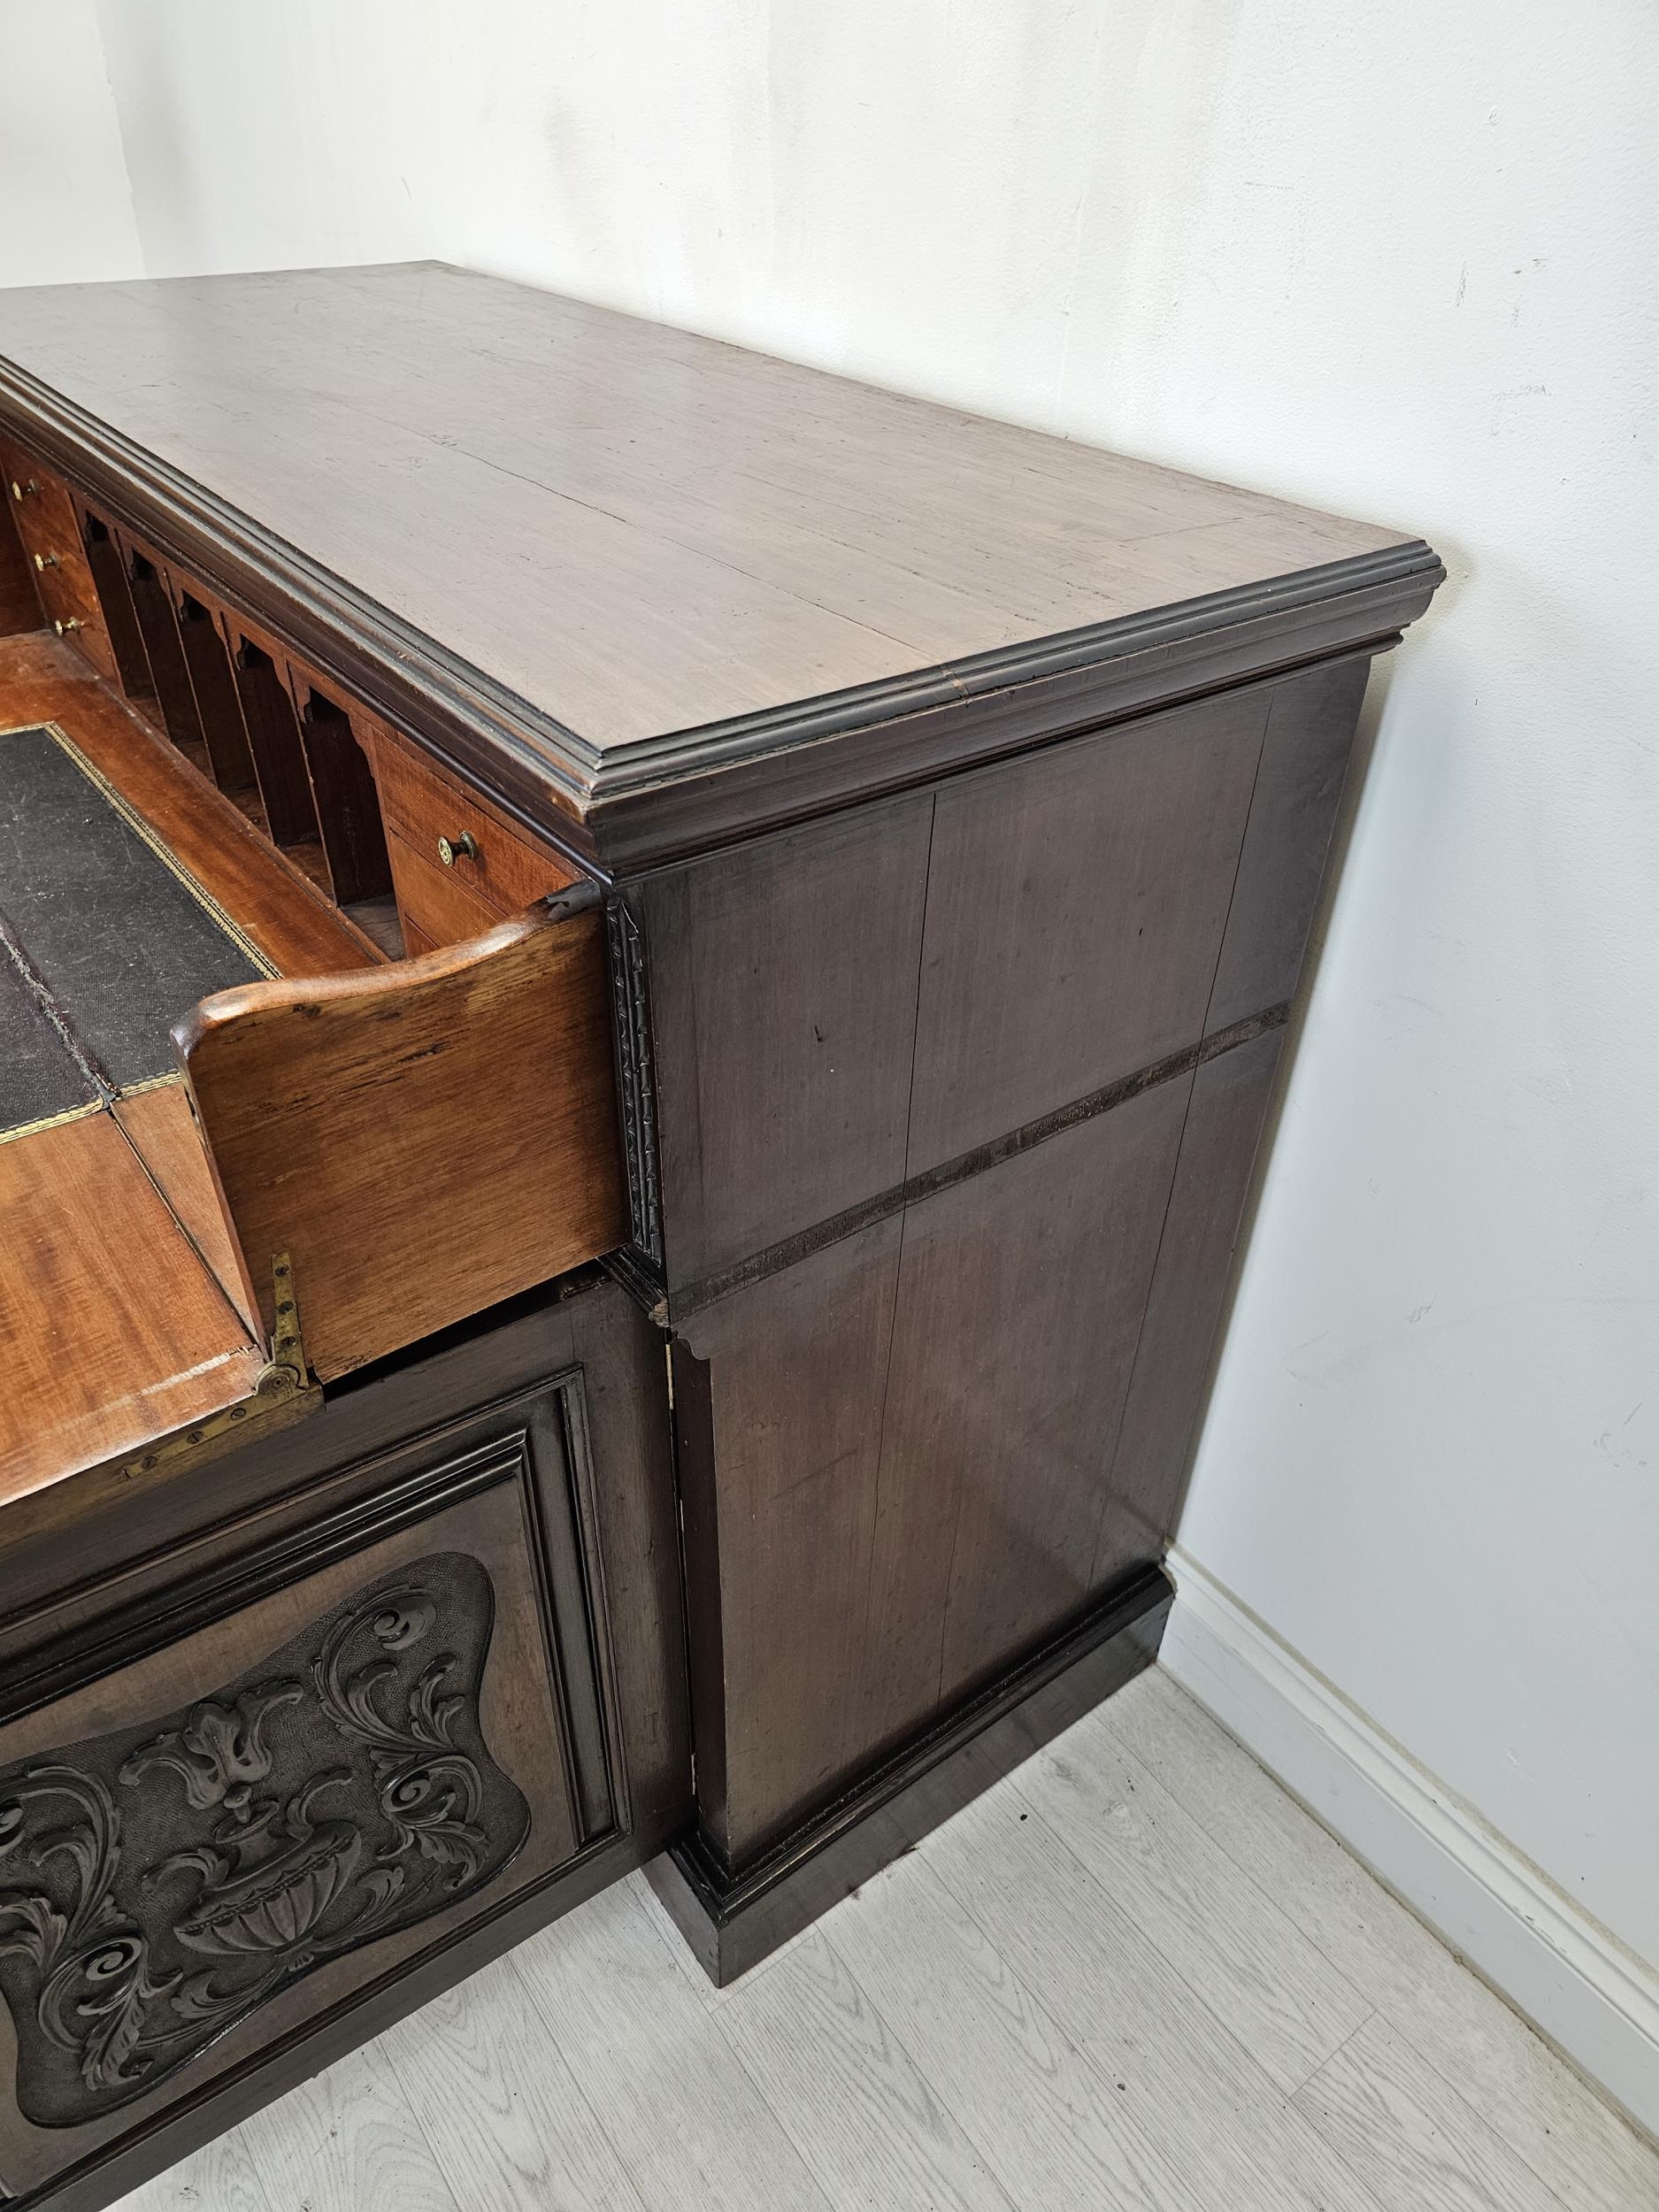 Secretaire cabinet, 19th century carved walnut with fall front revealing well fitted interior. H.100 - Image 9 of 15